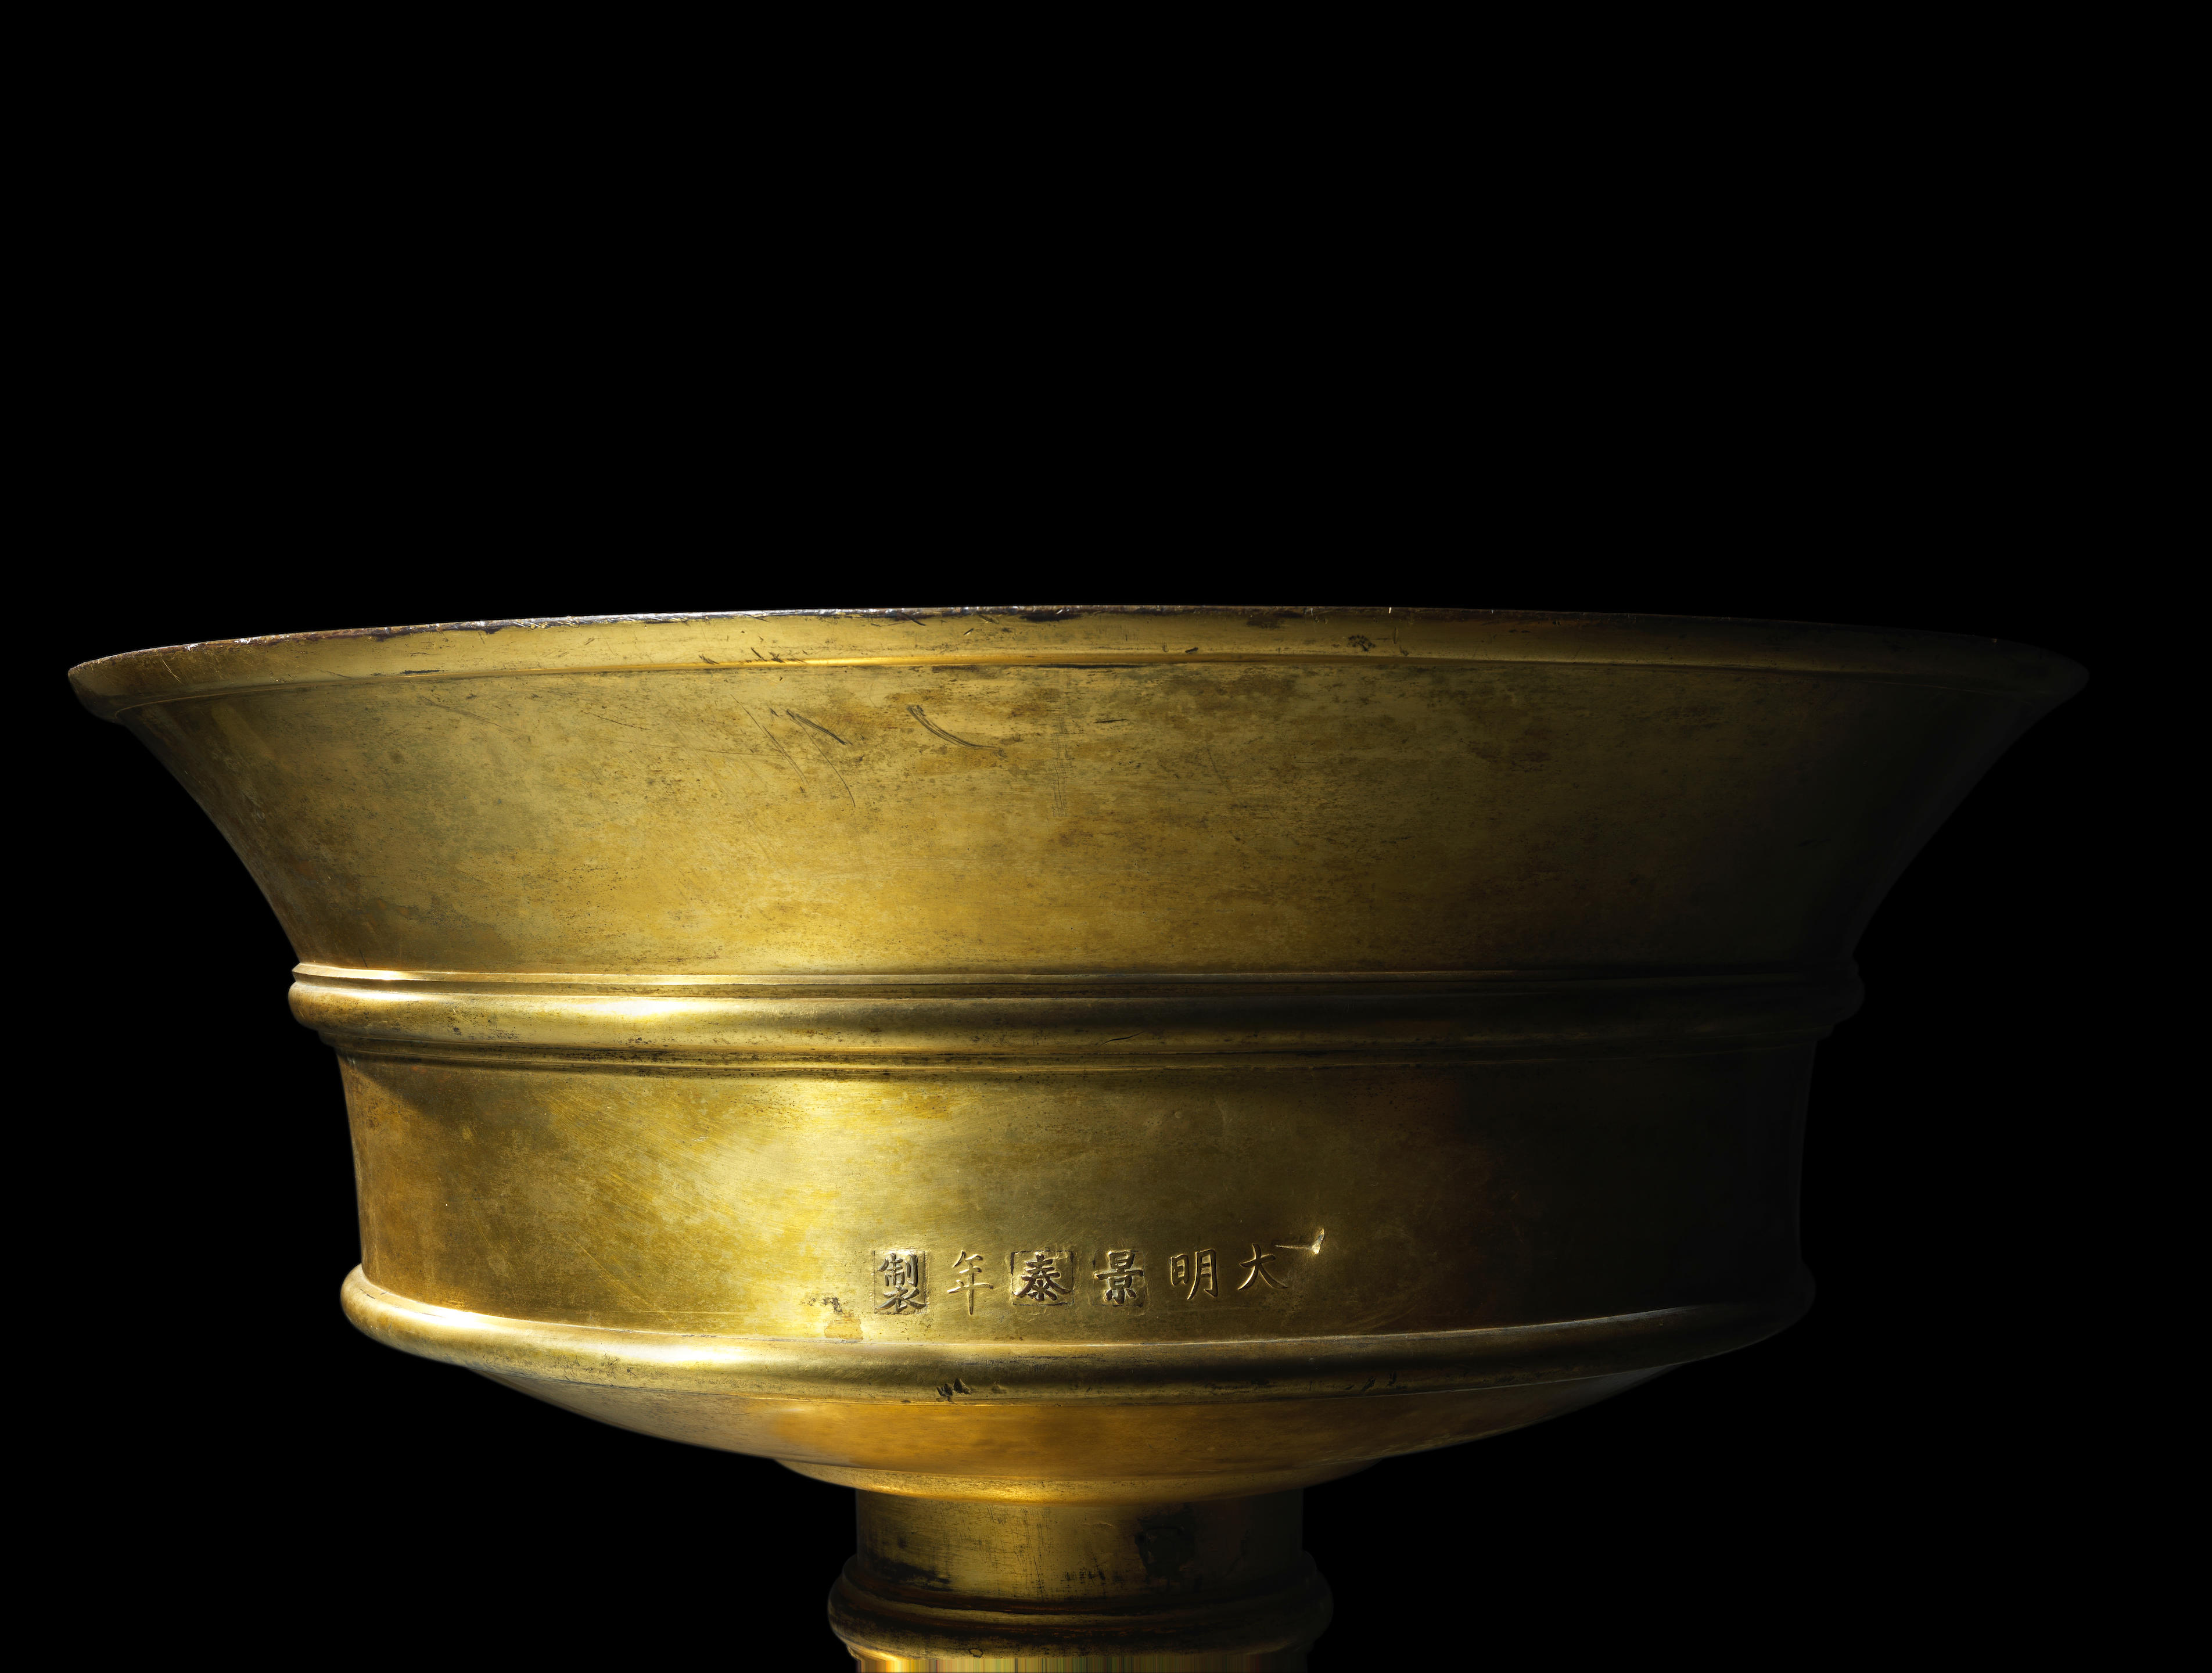 A monumental Imperial exceptionally rare cast gilt-bronze ritual butter  lamp Early Ming Dynasty, circa first half 15th century, cast Jingtai  six-character mark - Bonhams